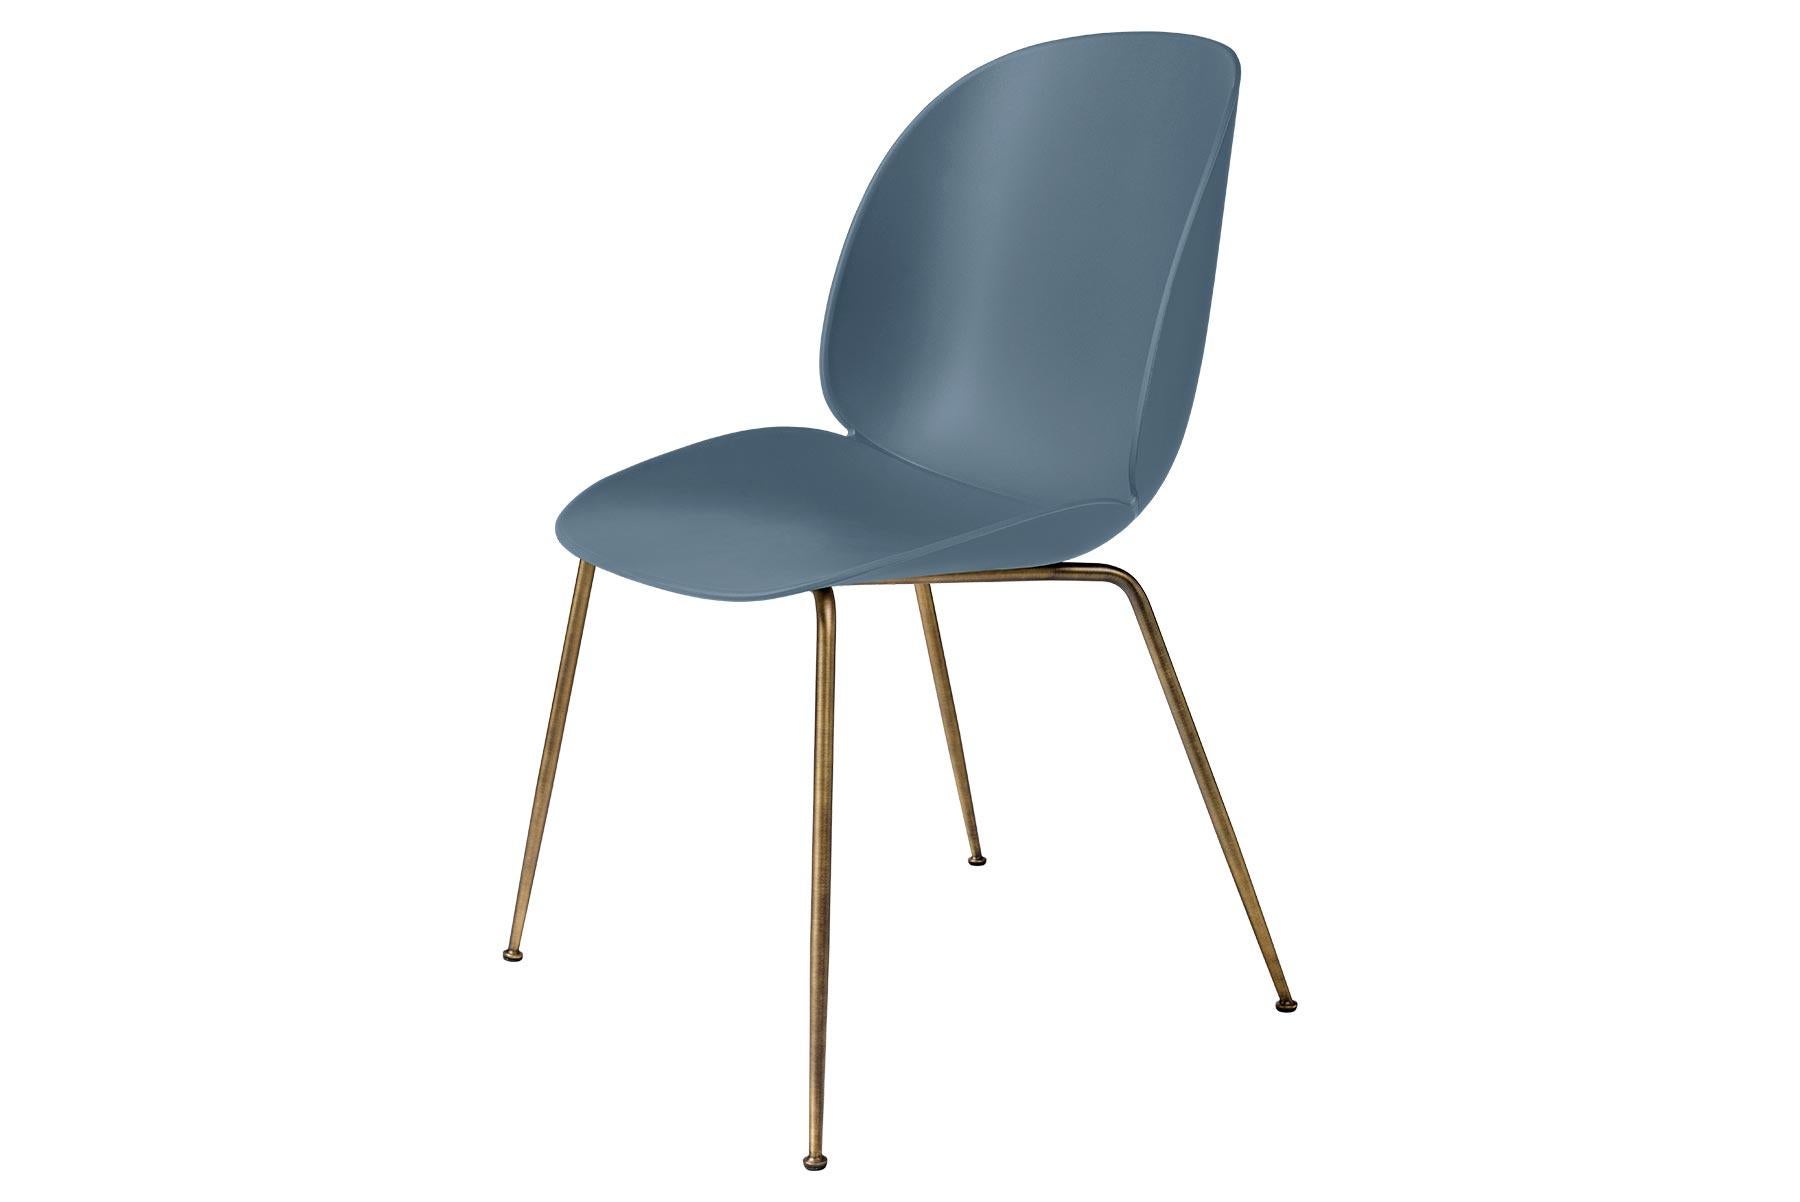 Beetle Dining Chair, Un-Upholstered, Conic Base, Antique Brass In New Condition For Sale In Berkeley, CA